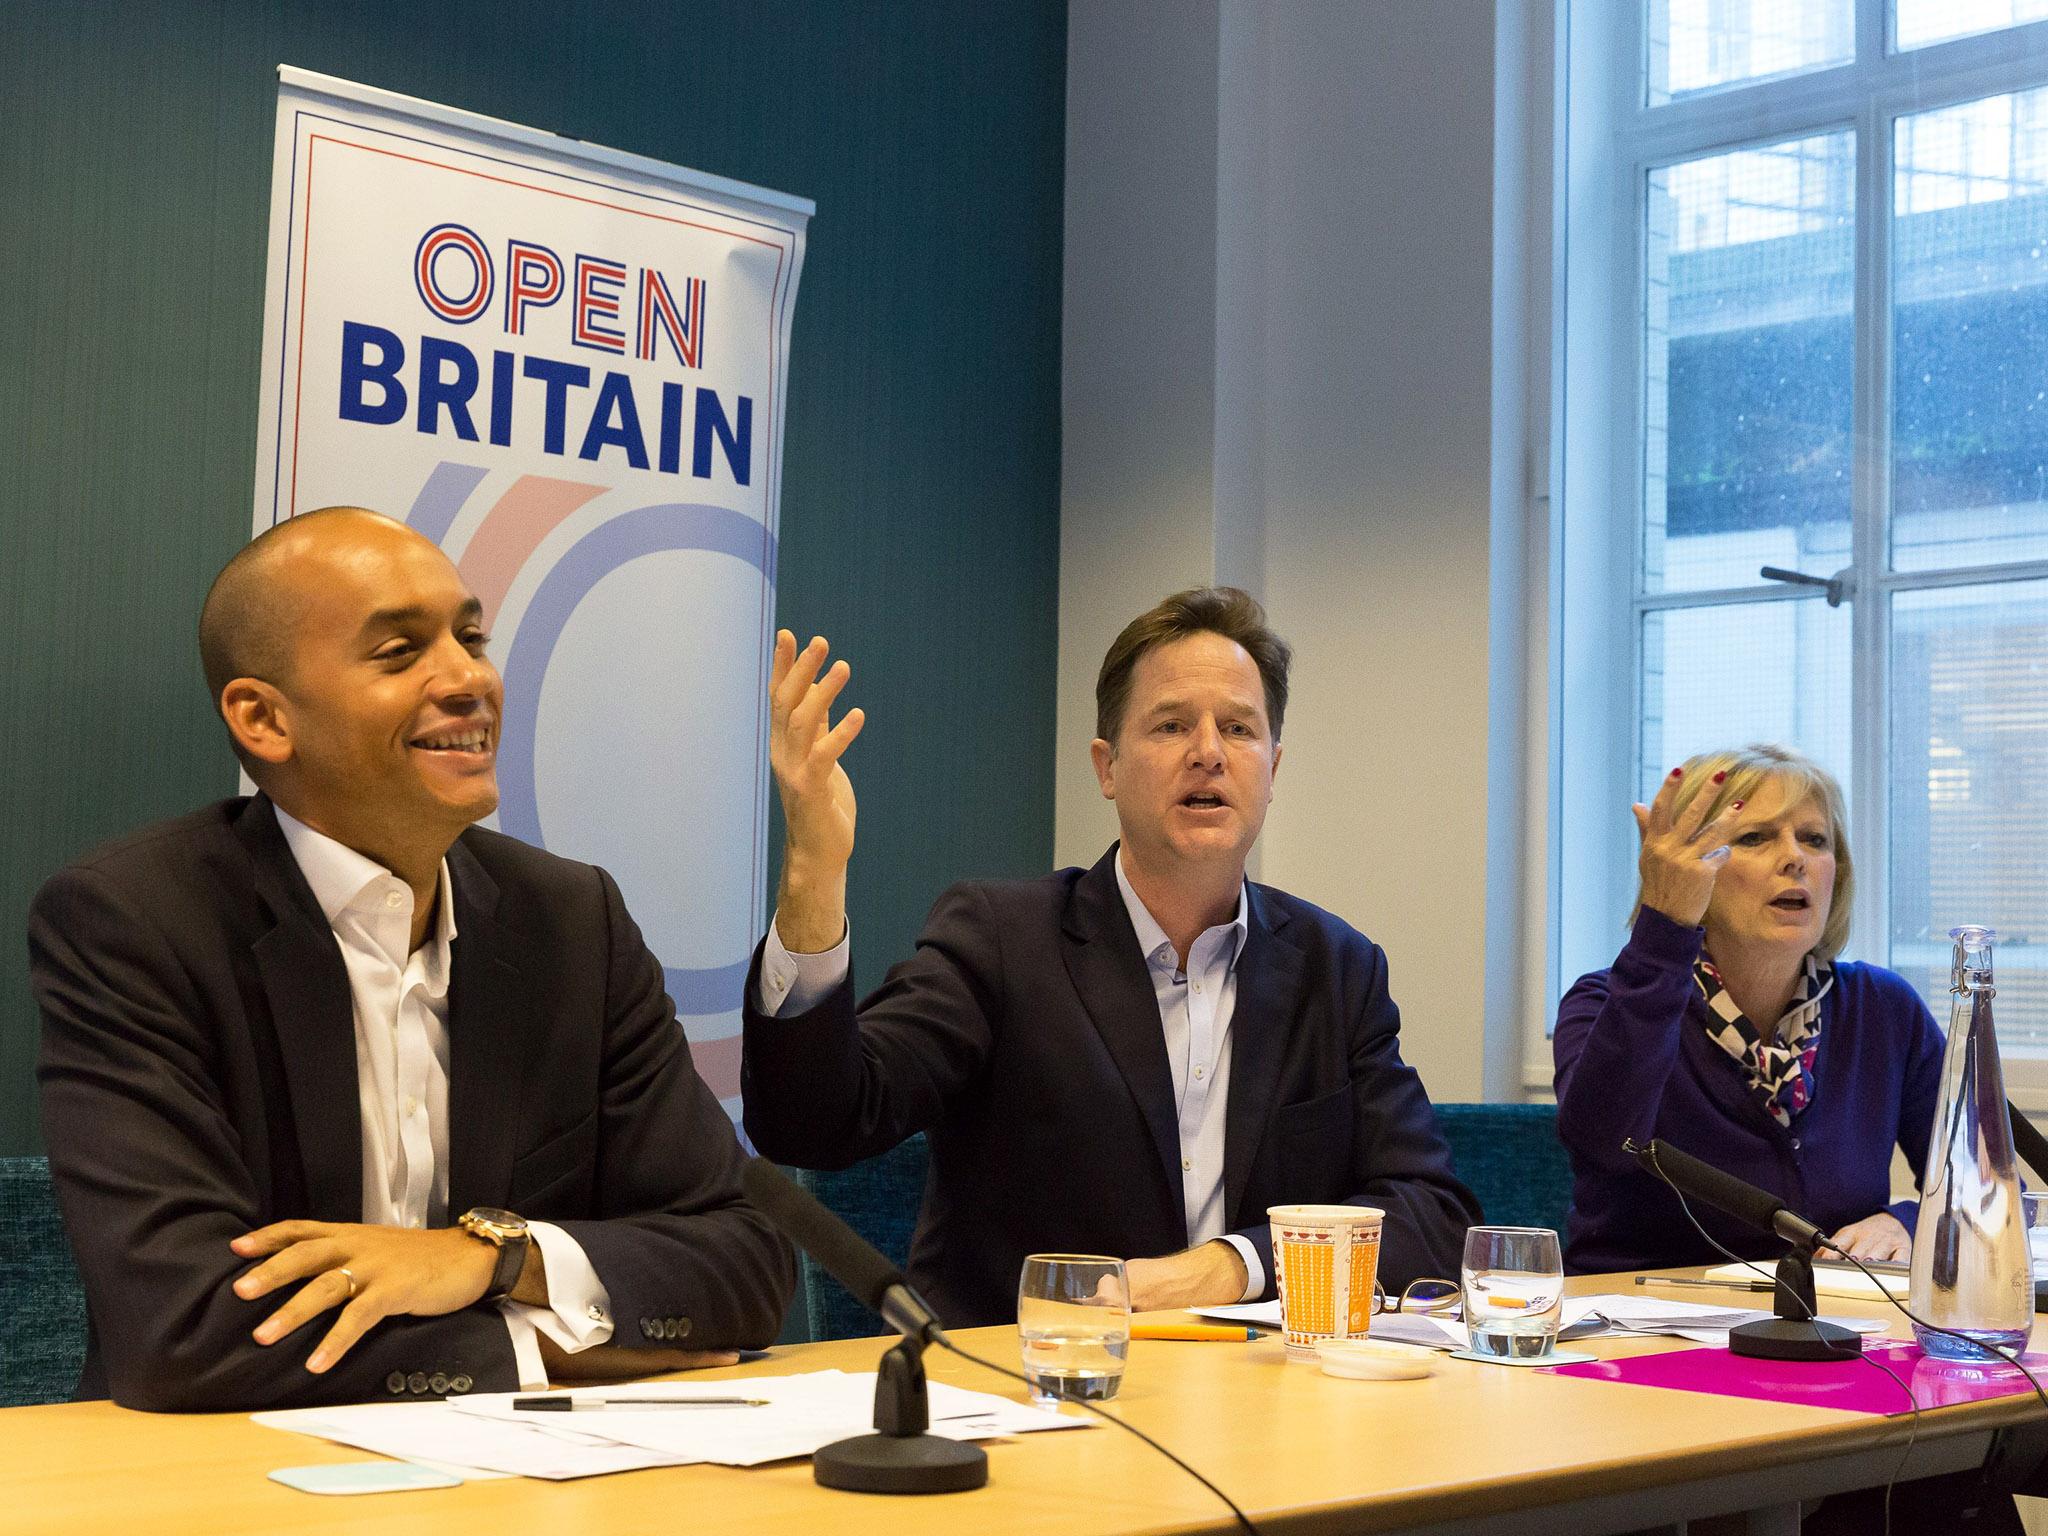 Chuka Umunna, Nick Clegg, and Anna Soubry at an Open Britain event in central London today